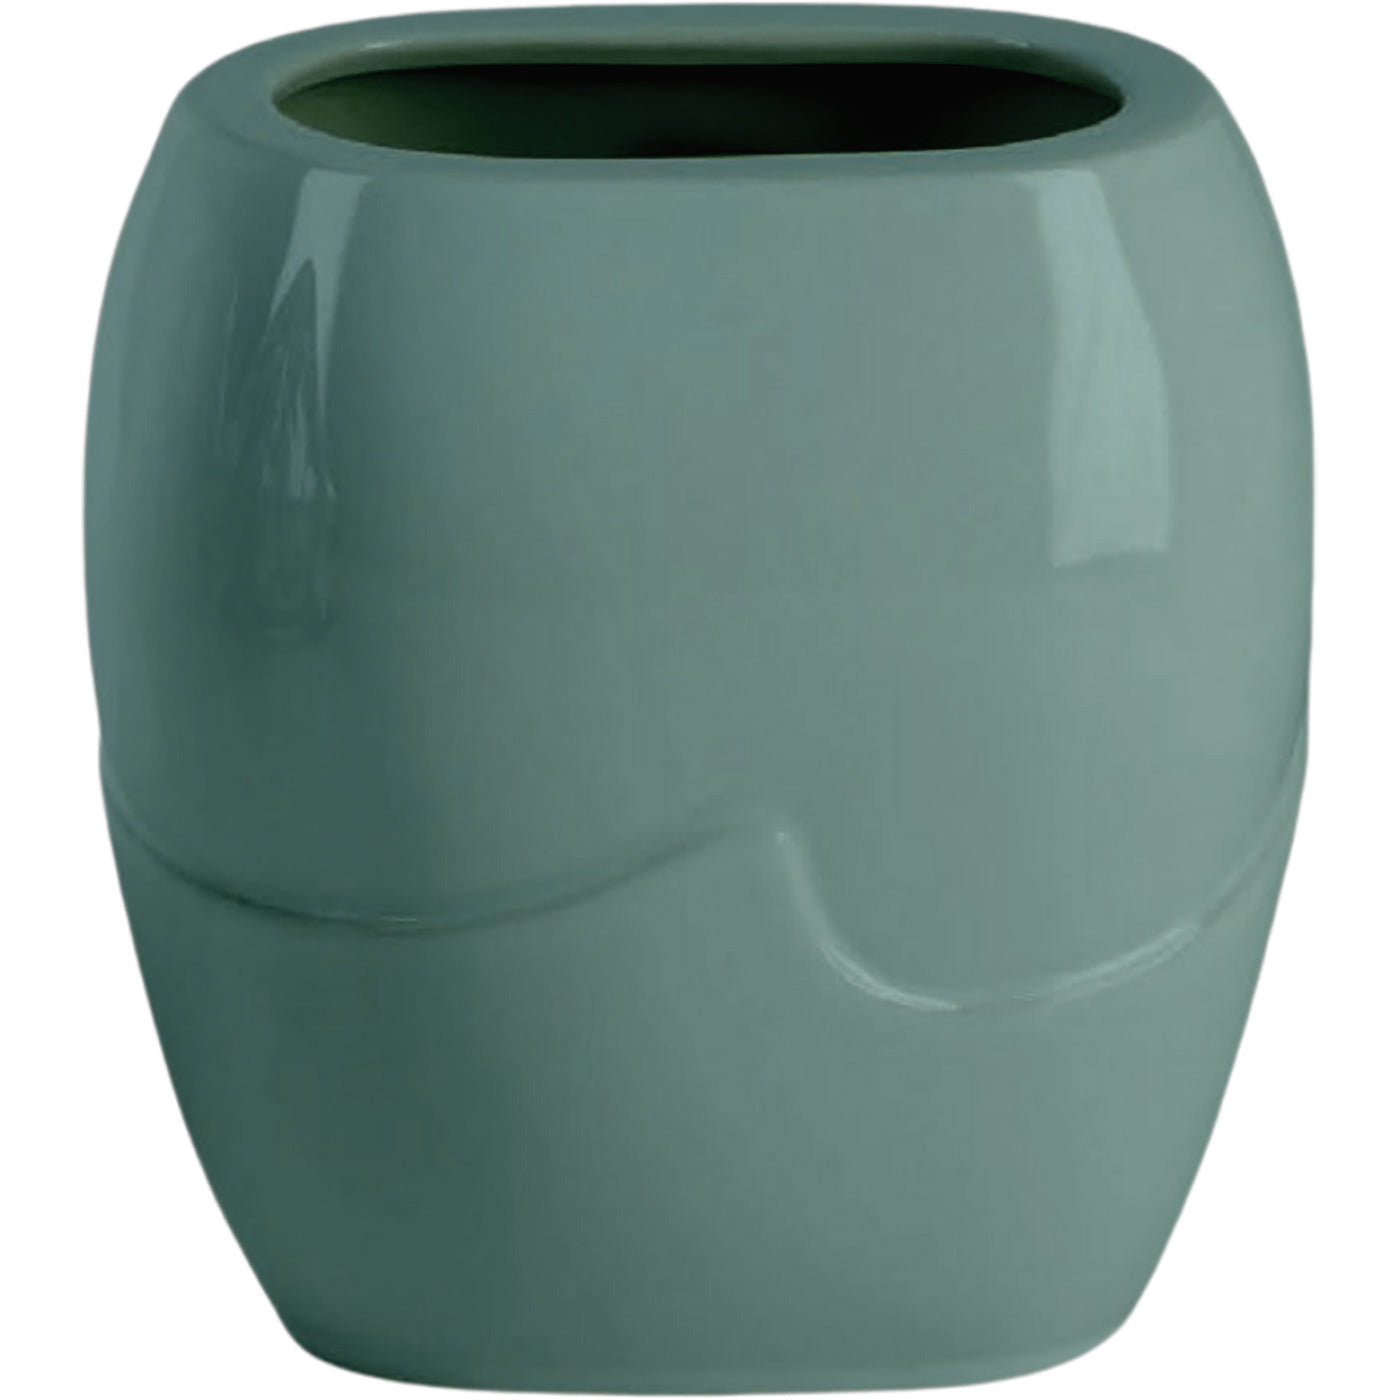 Rectangular grave vase Onda green 19x17cm - 7.5x6.7in In green porcelain, wall attached ON166P/V